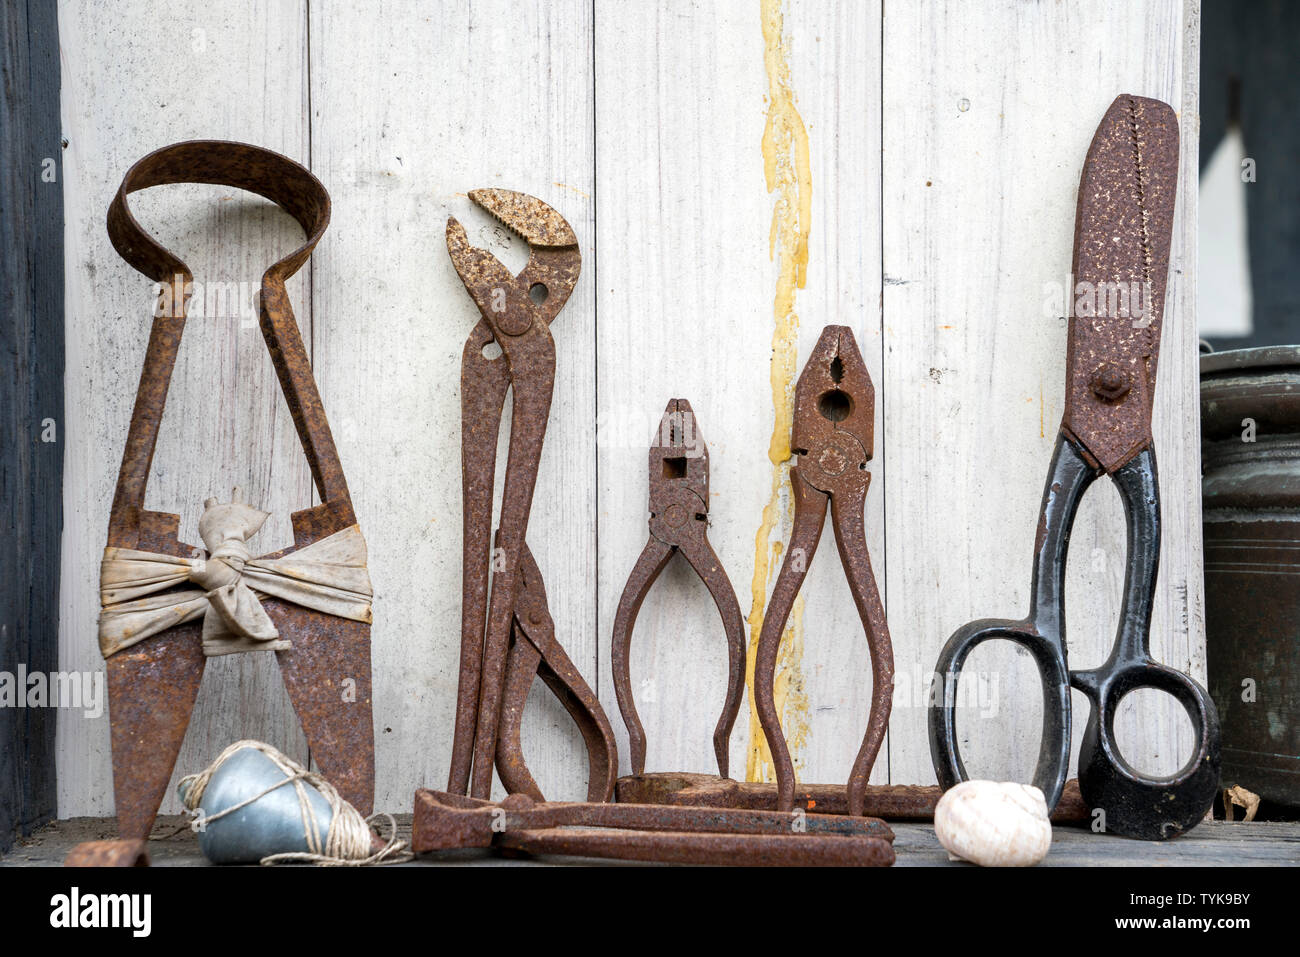 old scissors and pliers Stock Photo